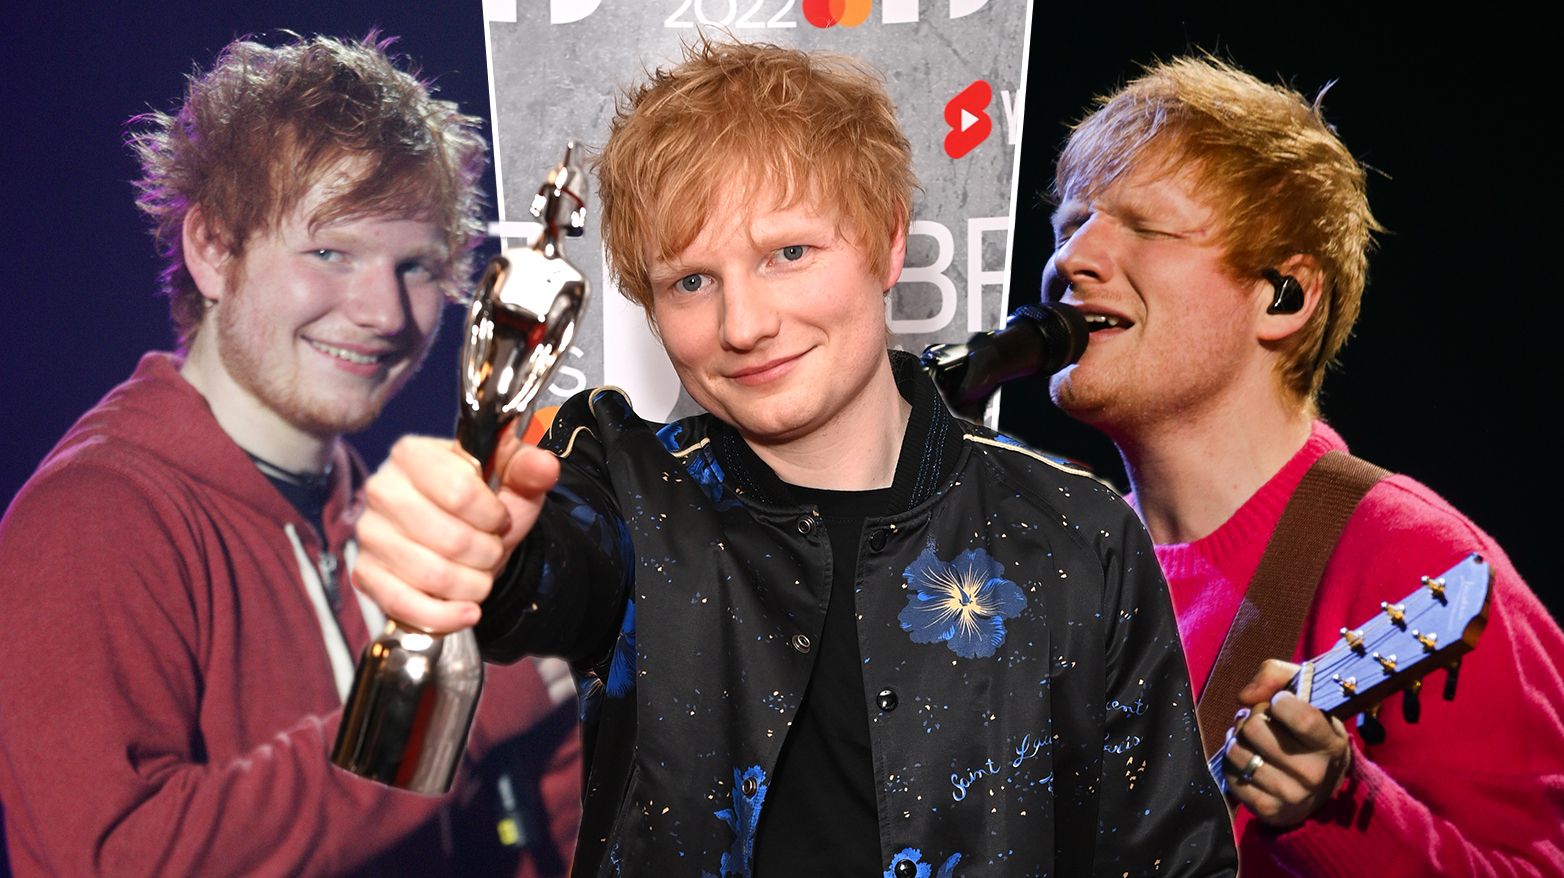 Ed Sheeran's career timeline: From a street busker to his Disney+  documentary